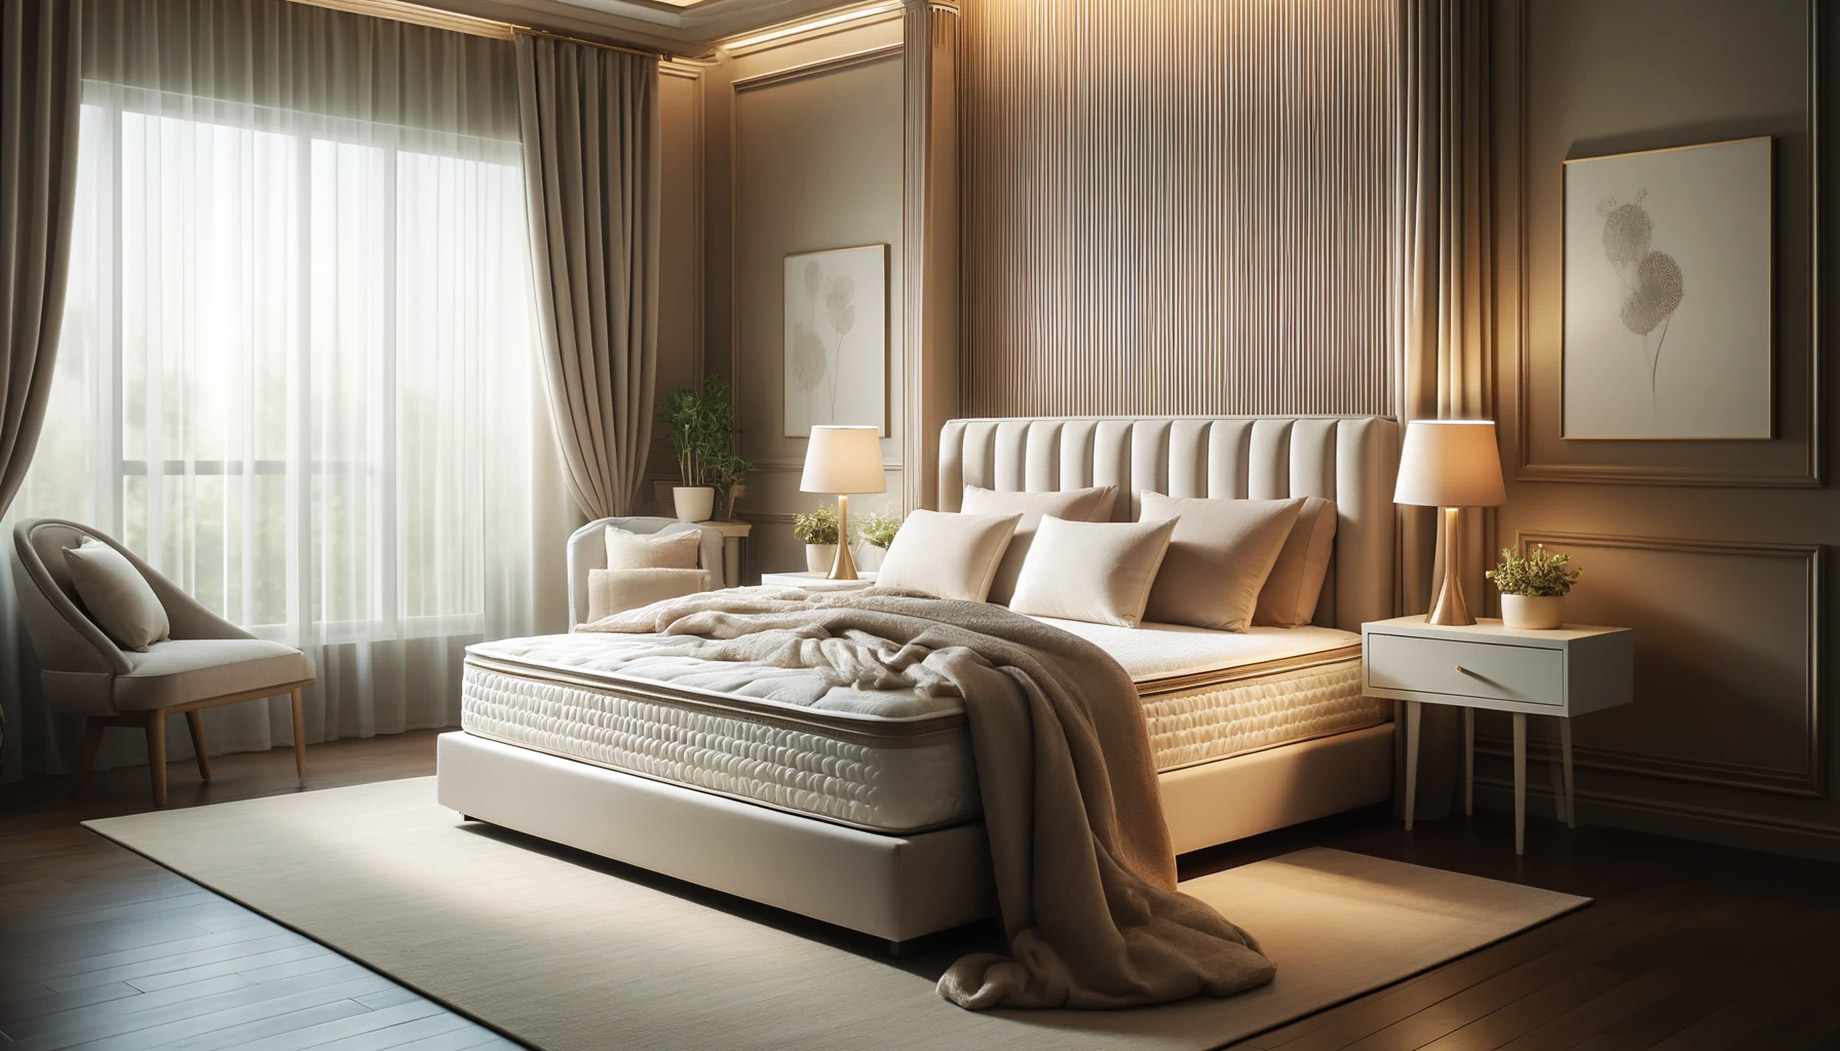 Selecting a Luxury Mattress for your Bed for a Better Sleep